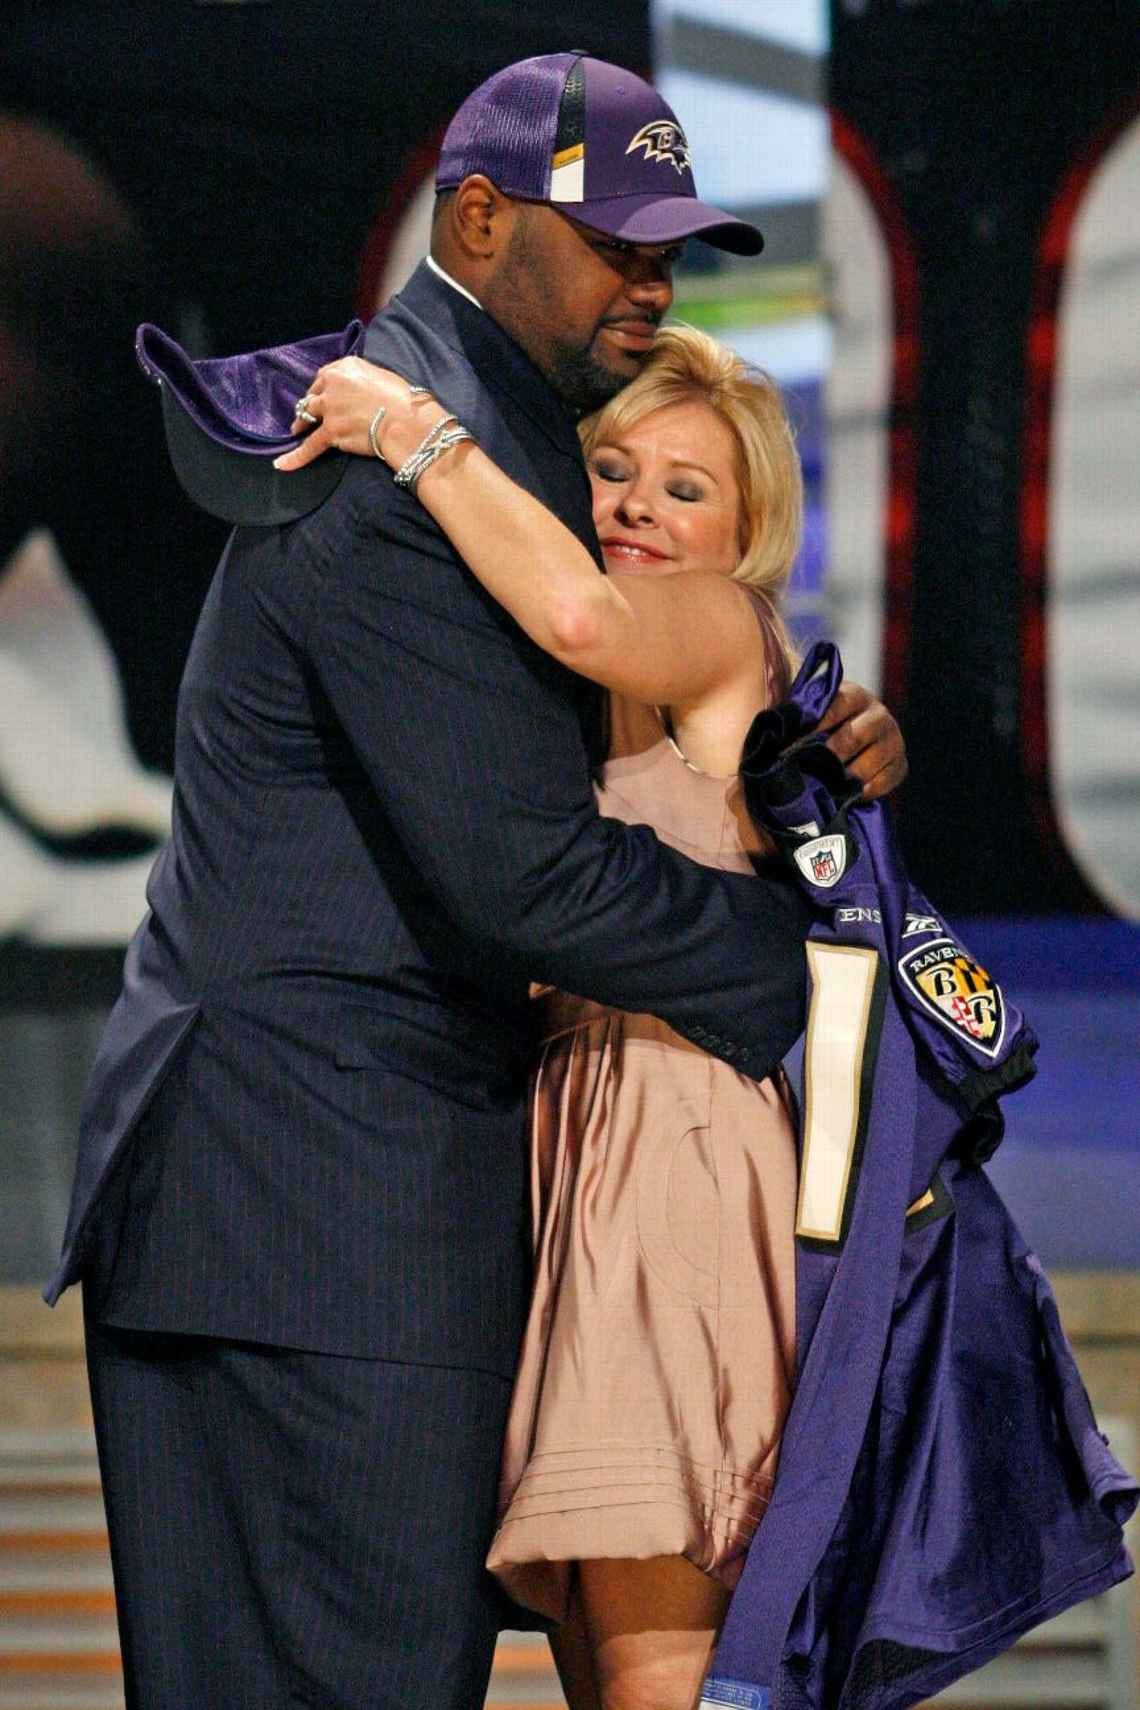 Michael Oher hugged by a woman cosplaying someone who cared for him